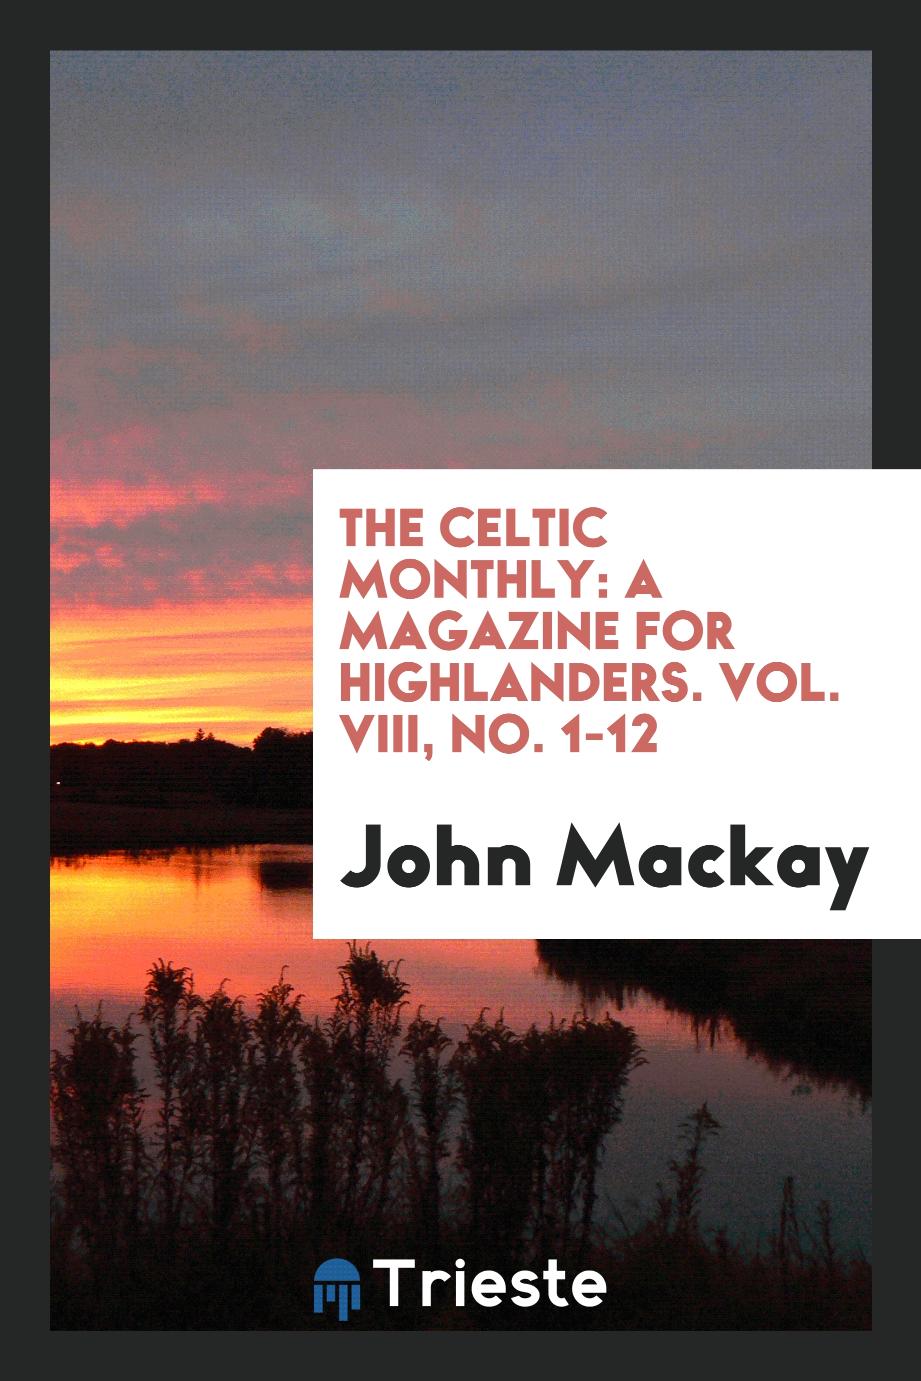 The Celtic Monthly: A Magazine for Highlanders. Vol. VIII, No. 1-12